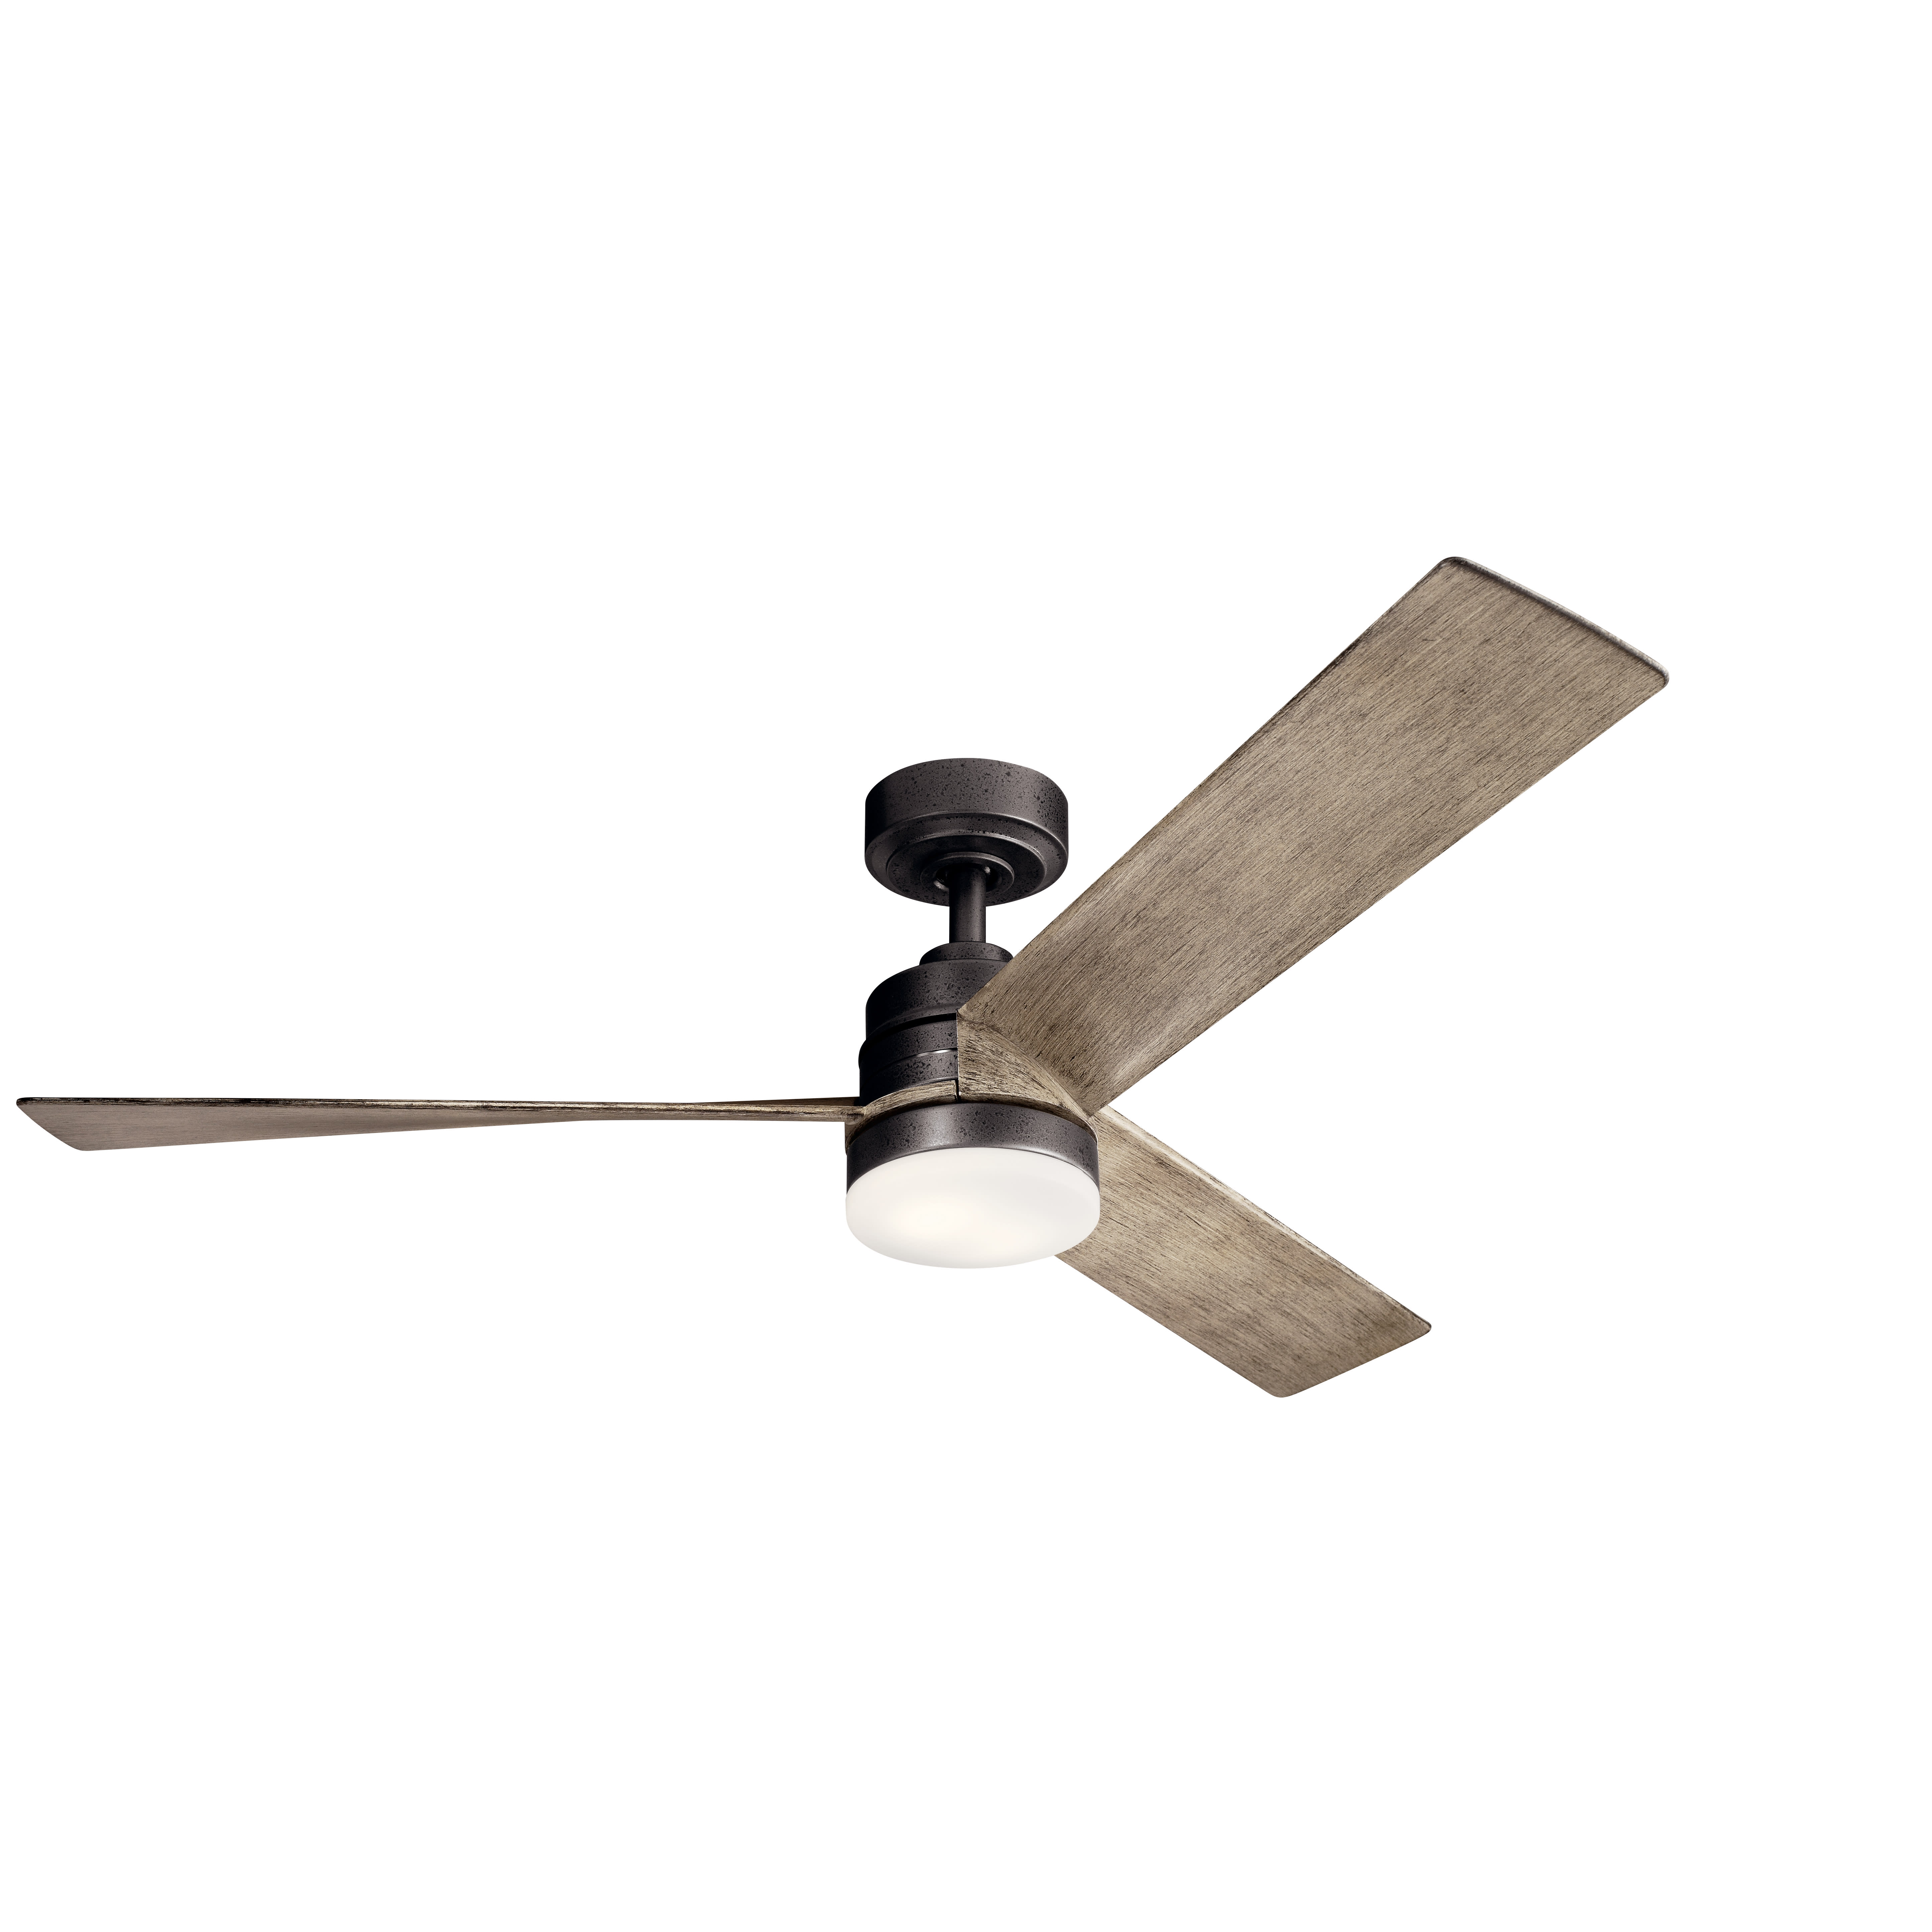 Kichler 300275NI Spyn 52" Ceiling Fan with LED Lights and Wall Control, Brushed Nickel - 1